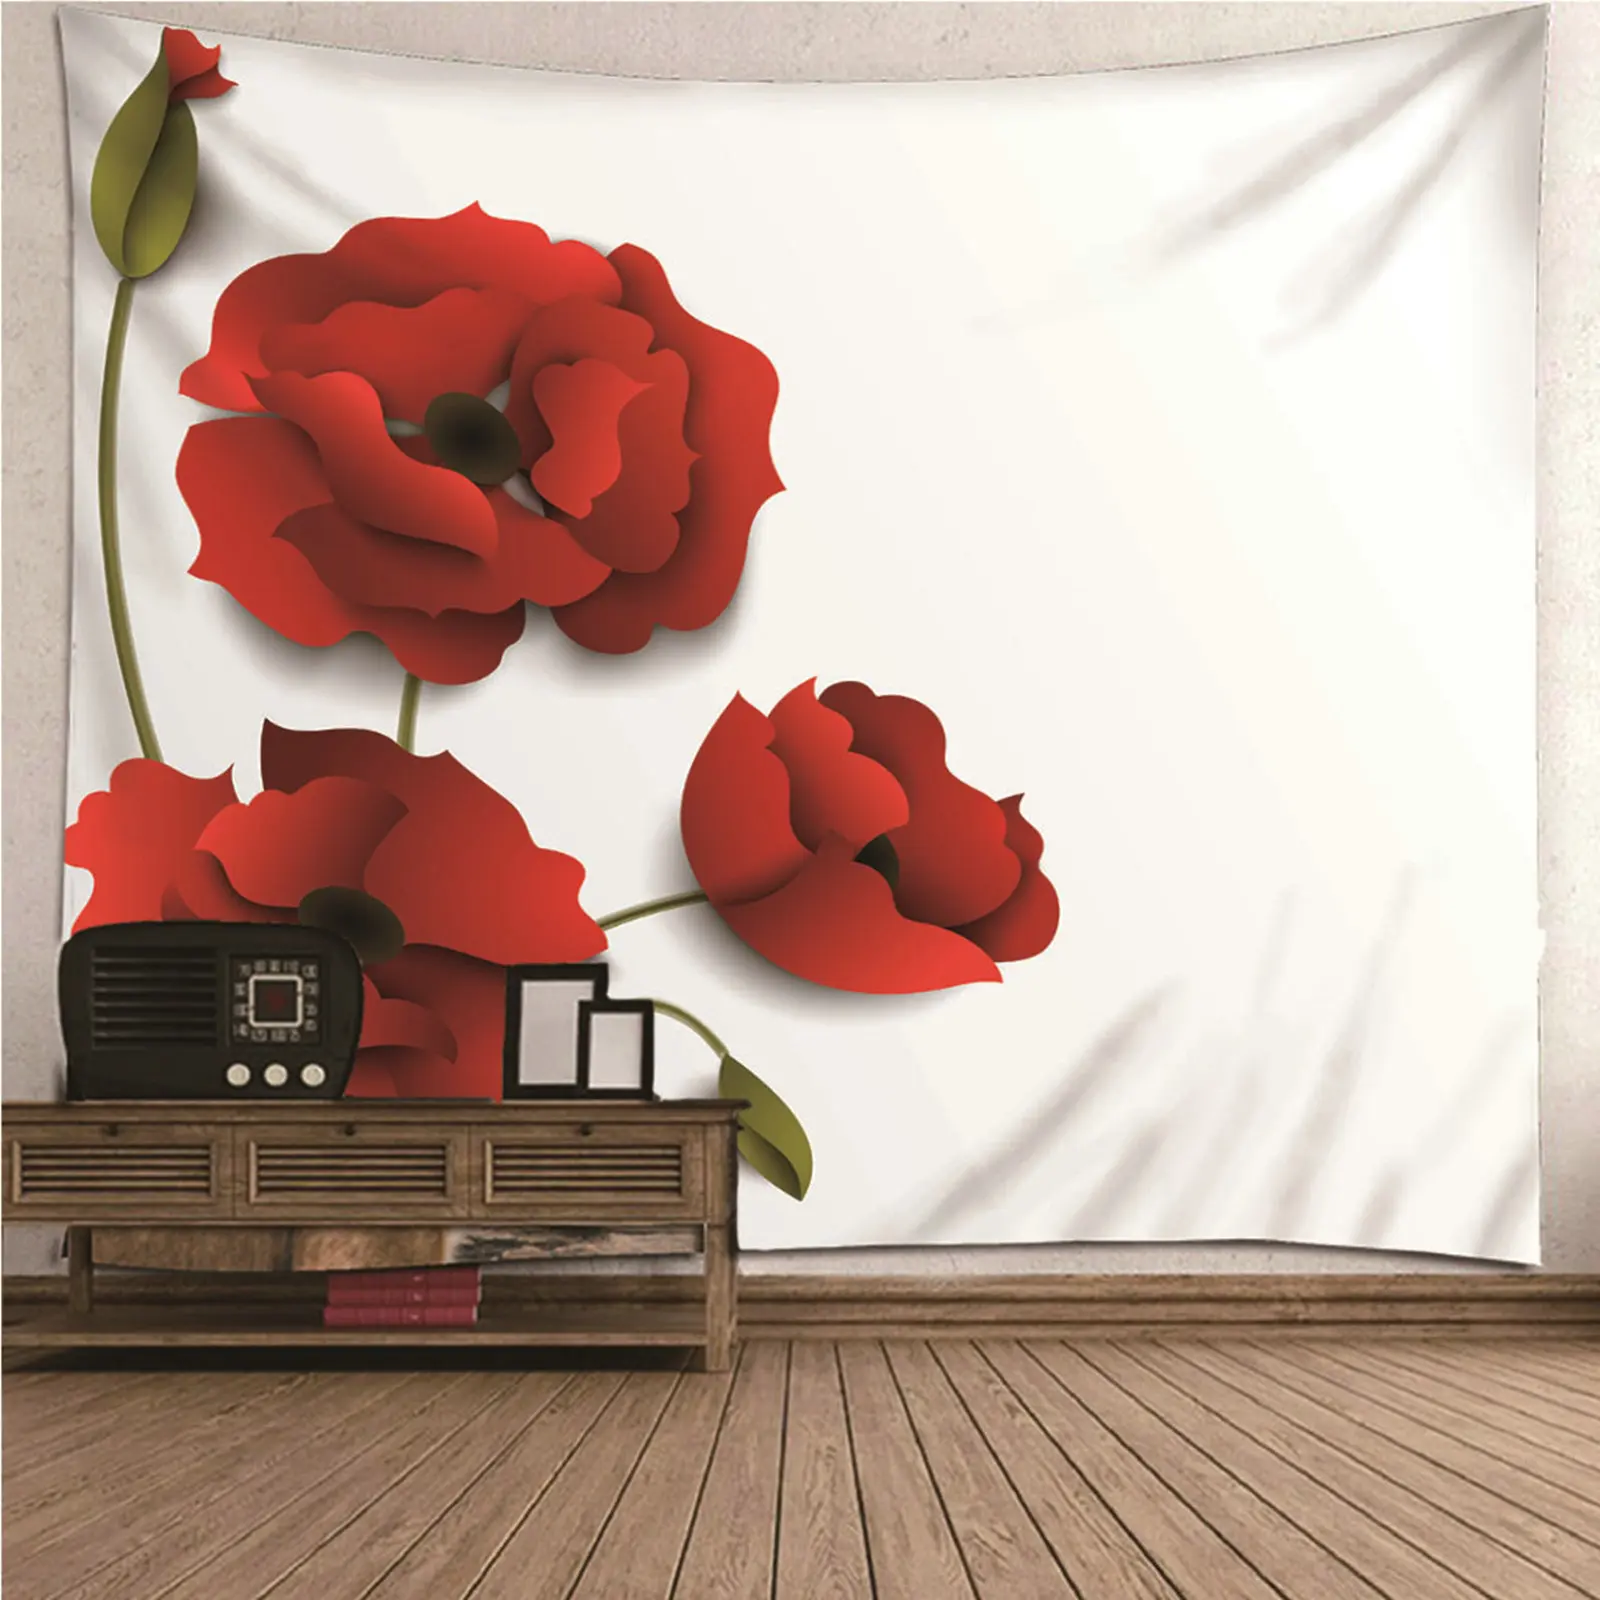 

Wall Covering Wall Hangings Decor Plant flower nature 3D Flowers Wall Hanging Blanket Dorm Art Decor Covering